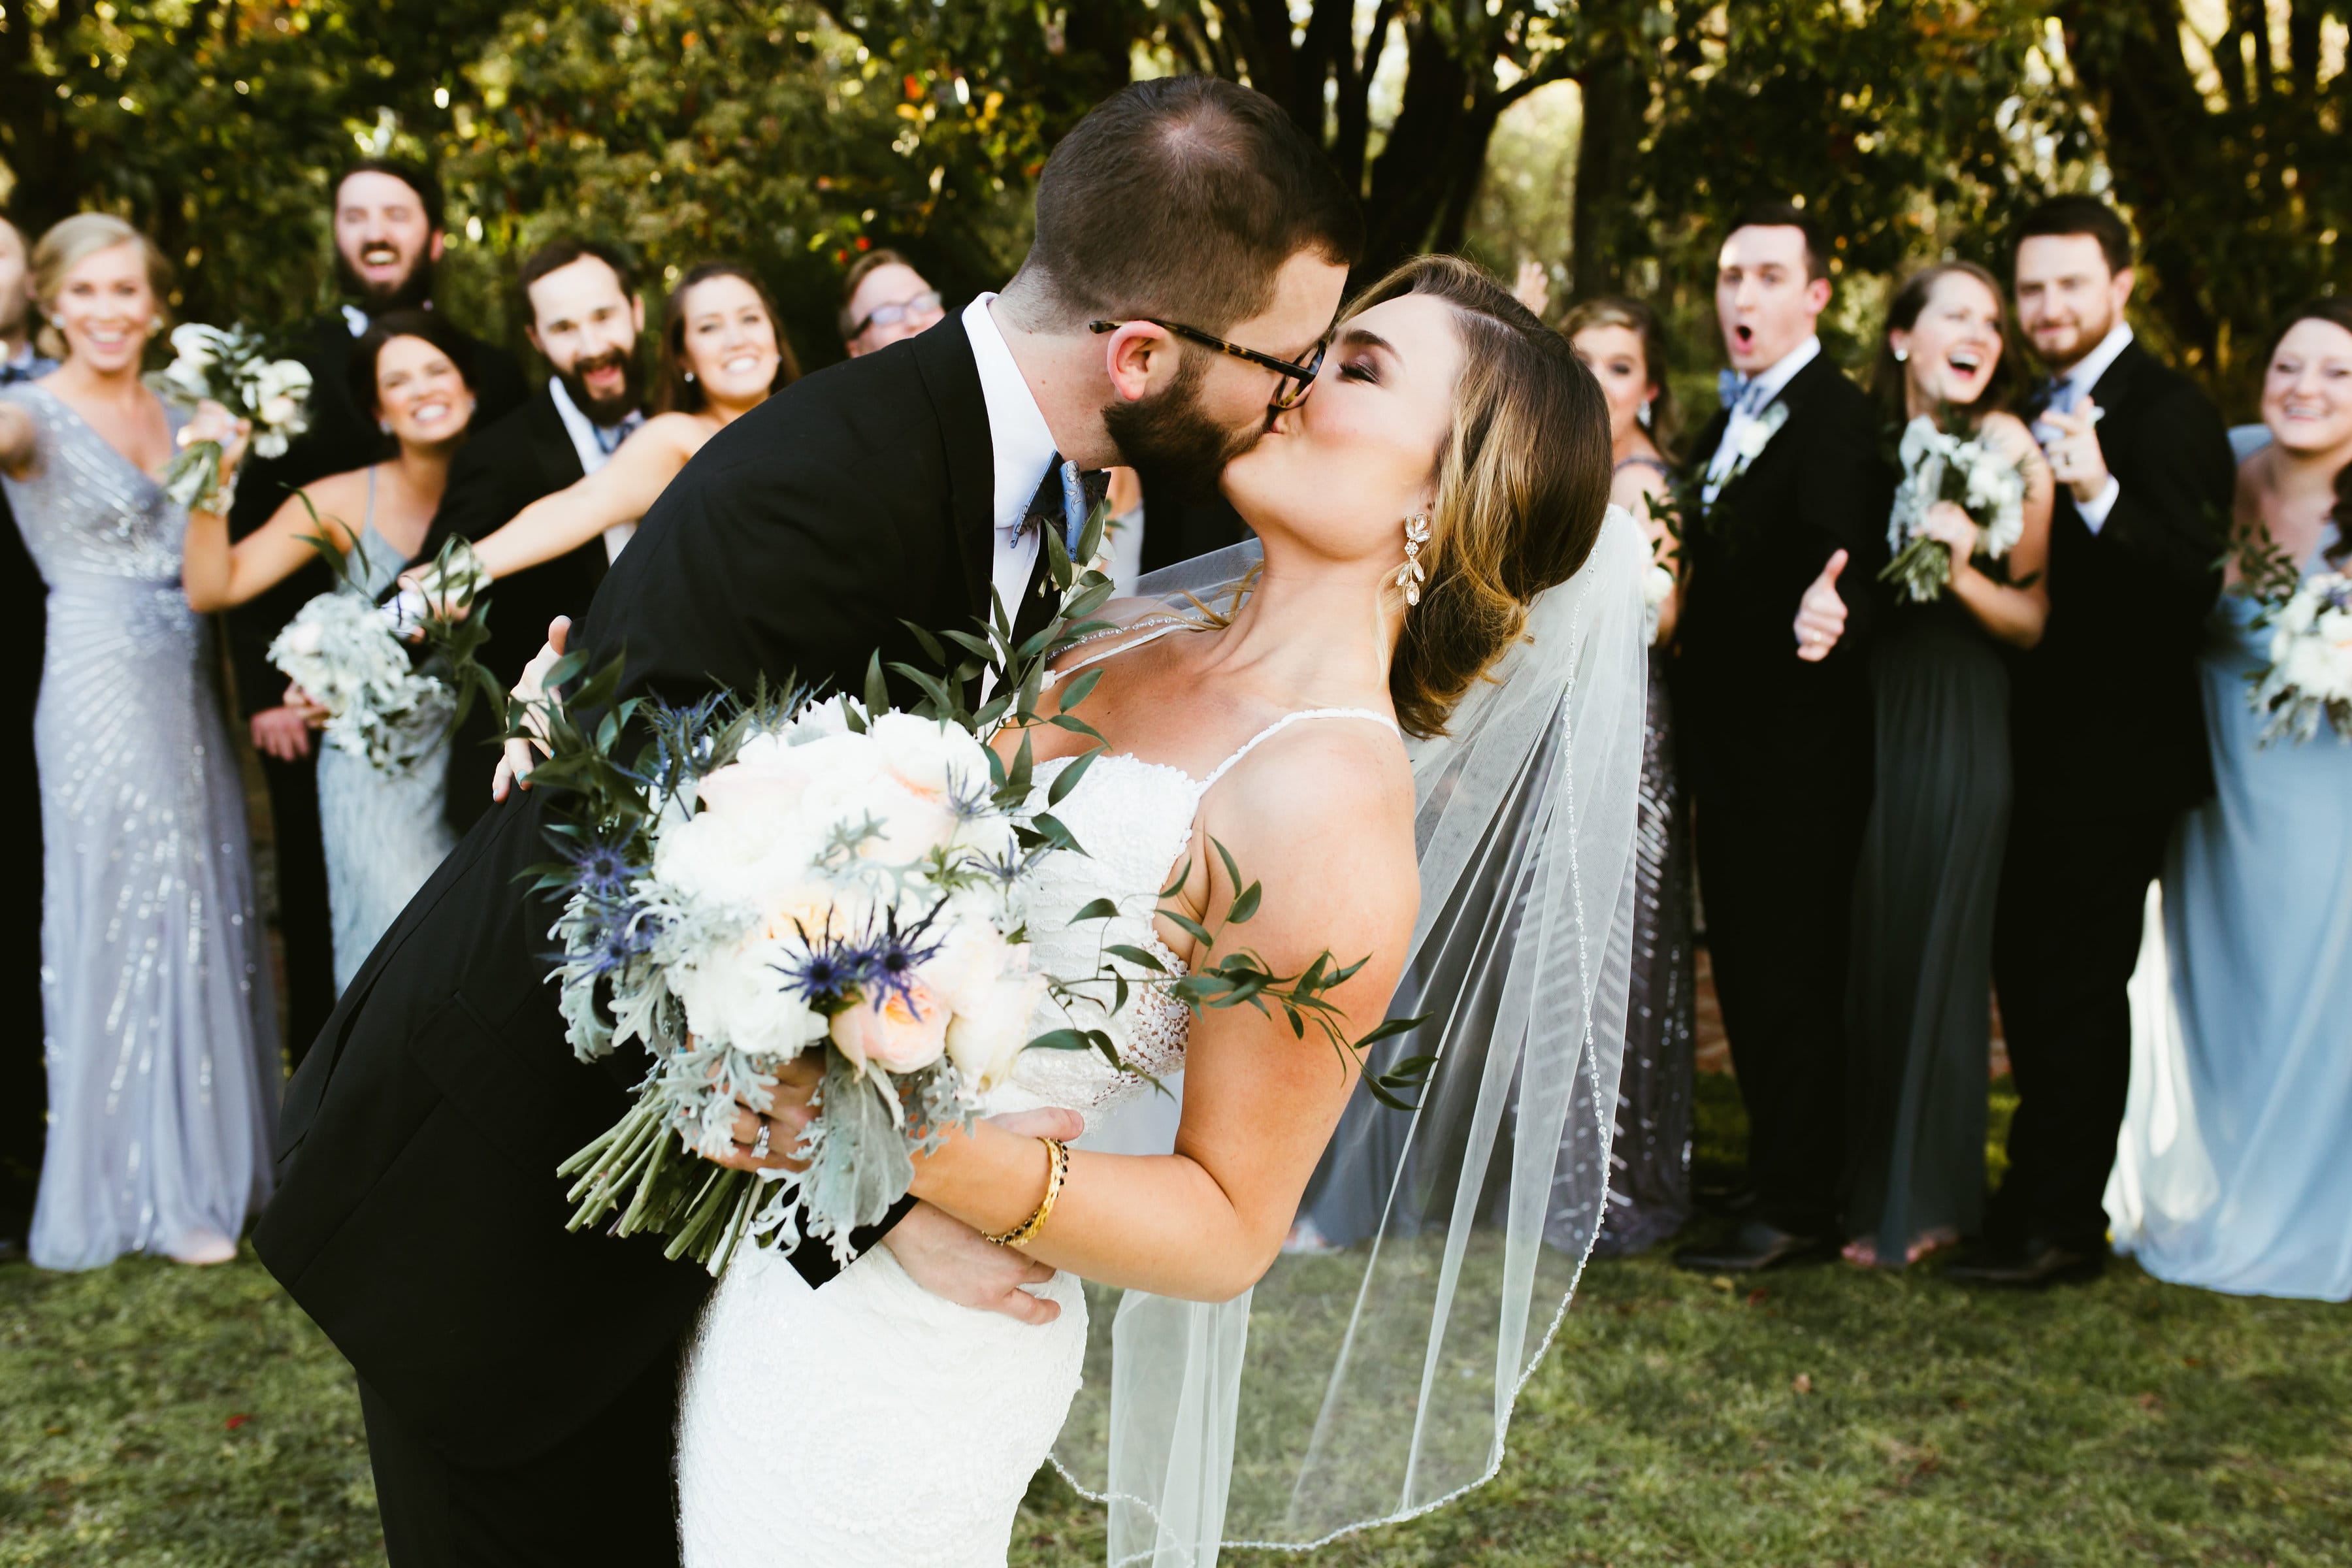 Groom Kissing Real Bride Wearing Maggie Sottero Wedding Dress While Guests Cheer in Background